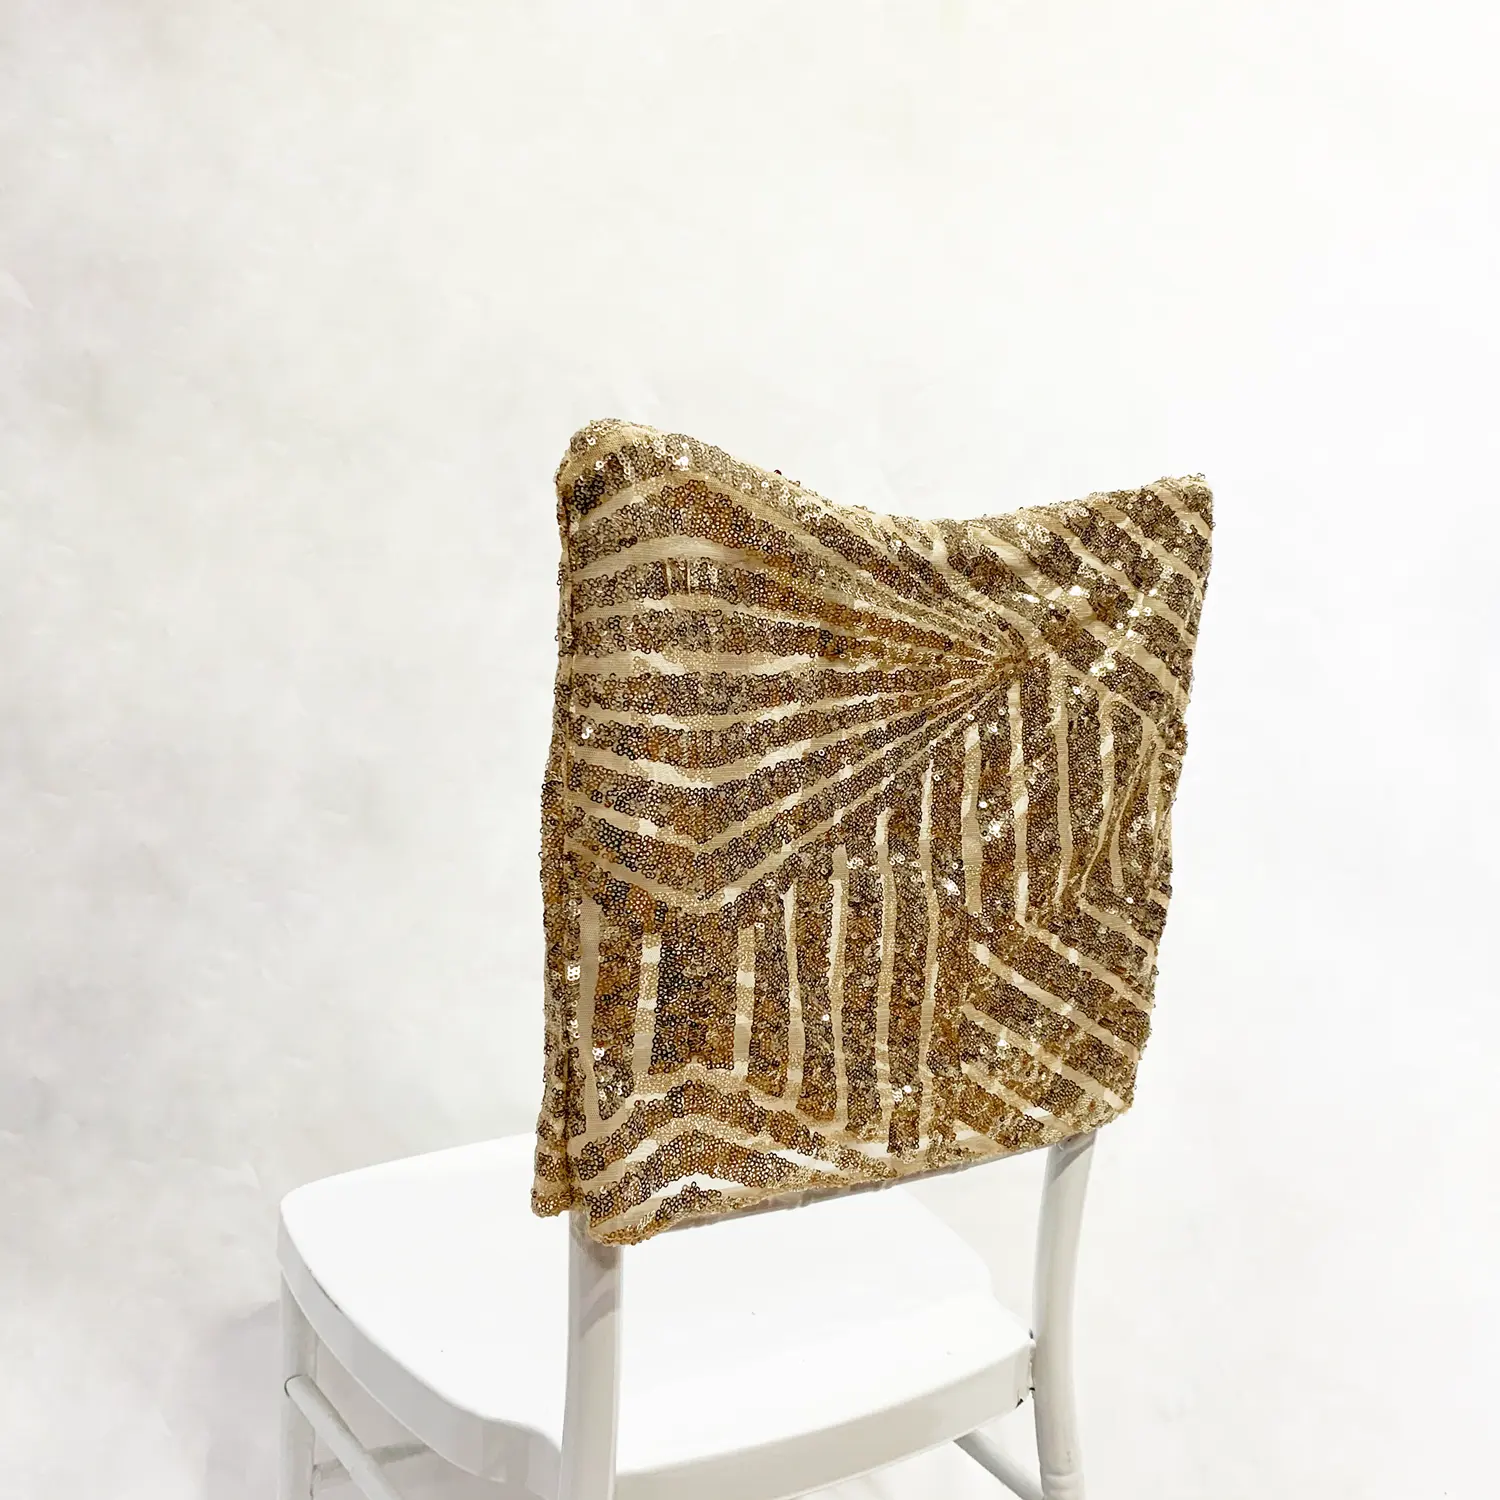 Hot sale products living room birthday party sequin wedding chair cap covers wedding decoration